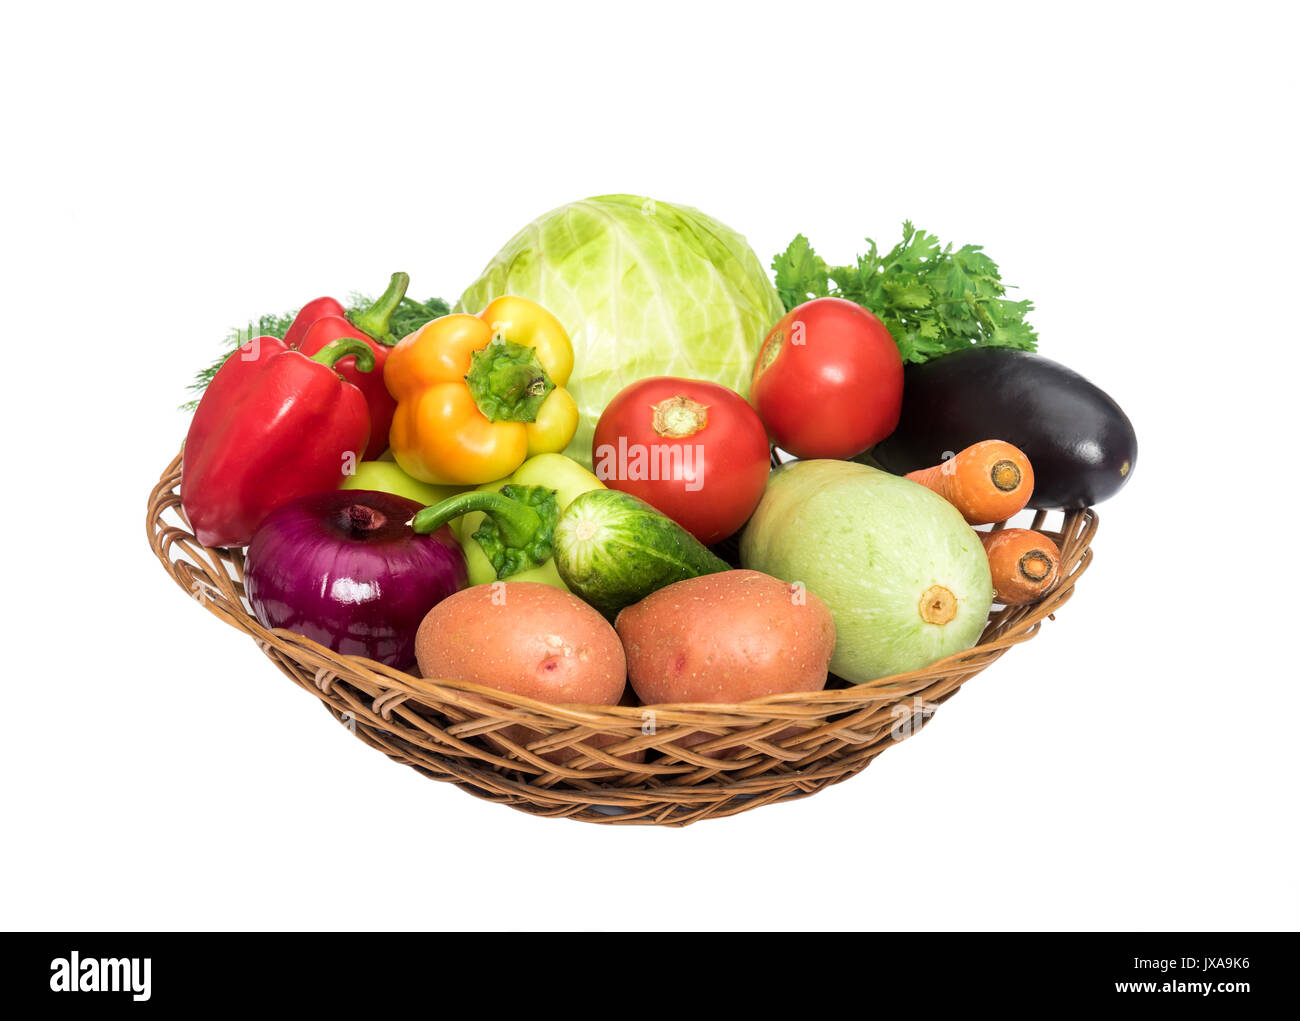 Basket with fresh mixed vegetables on white background Stock Photo